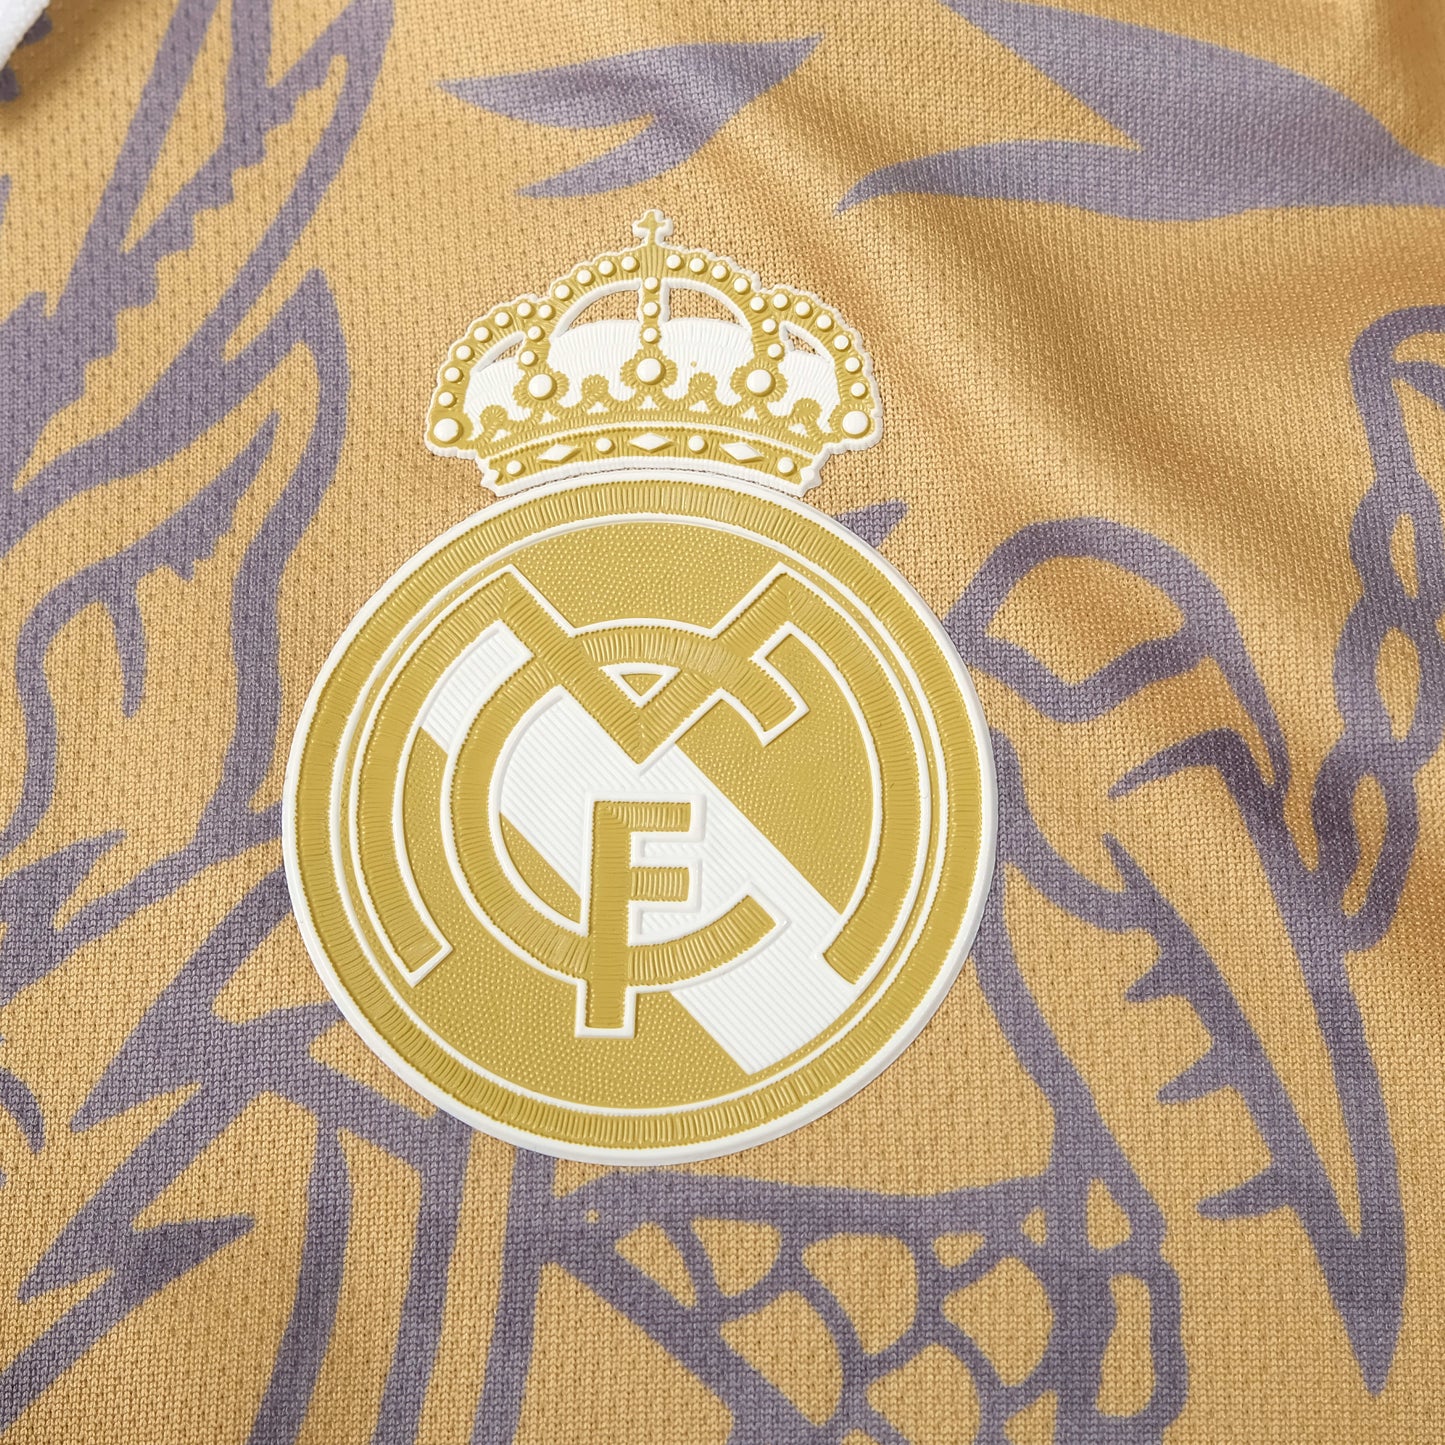 Real Madrid 23/24 "Gold Dragon" Jersey